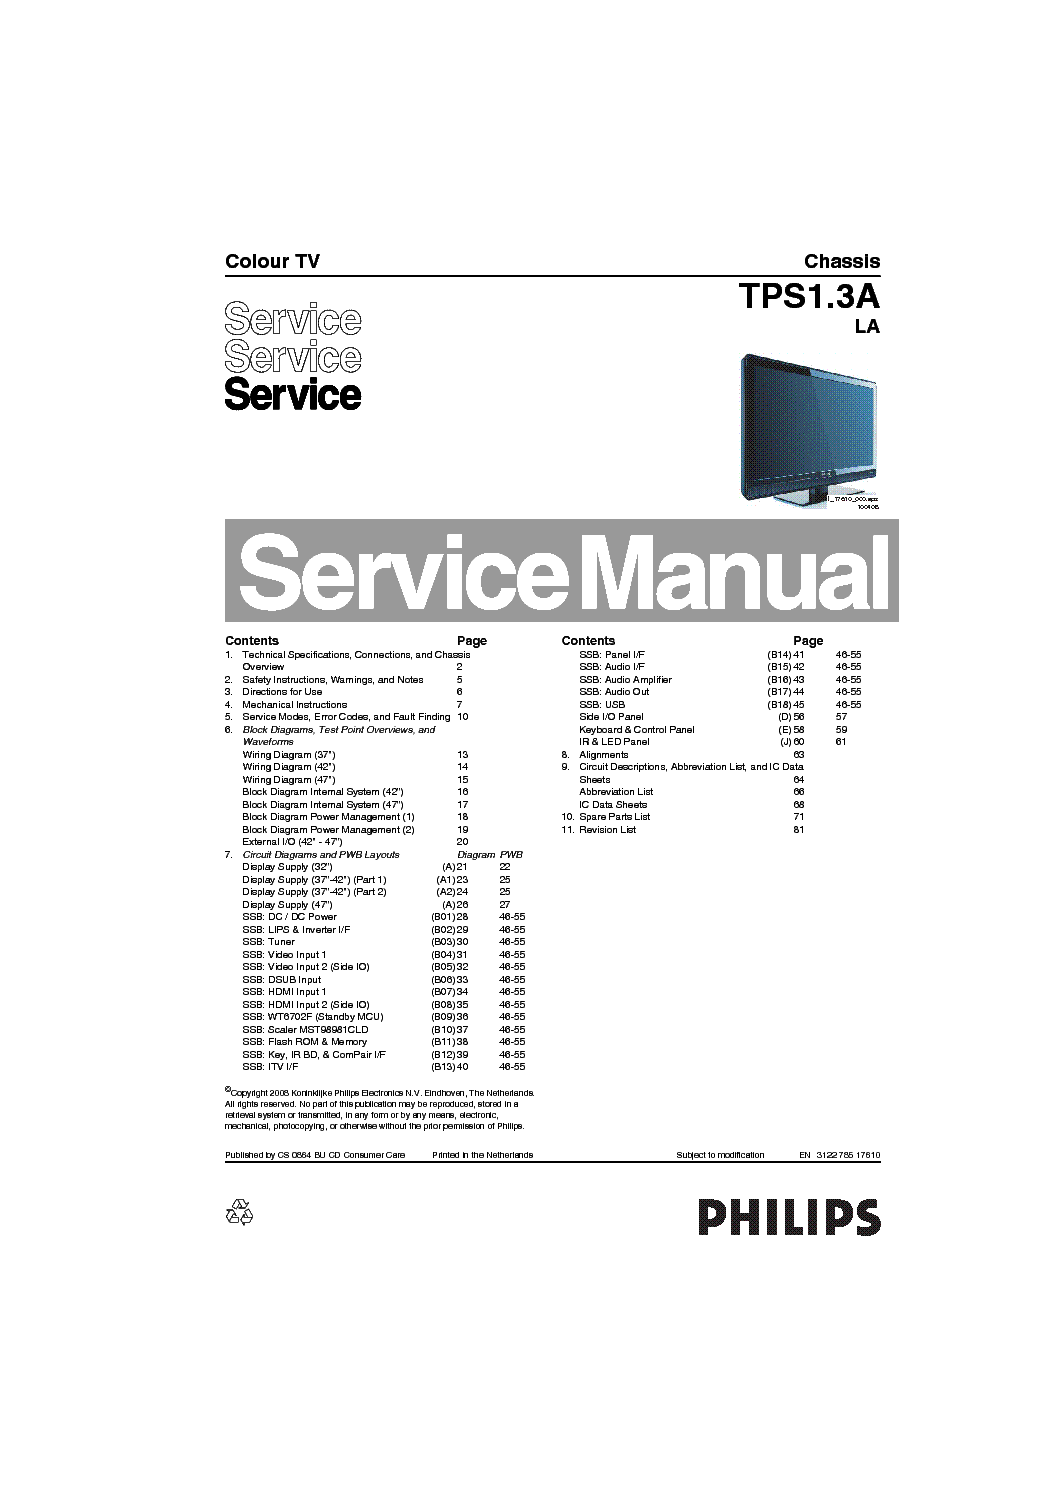 PHILIPS TPS1.3ALA 312278517610 service manual (1st page)